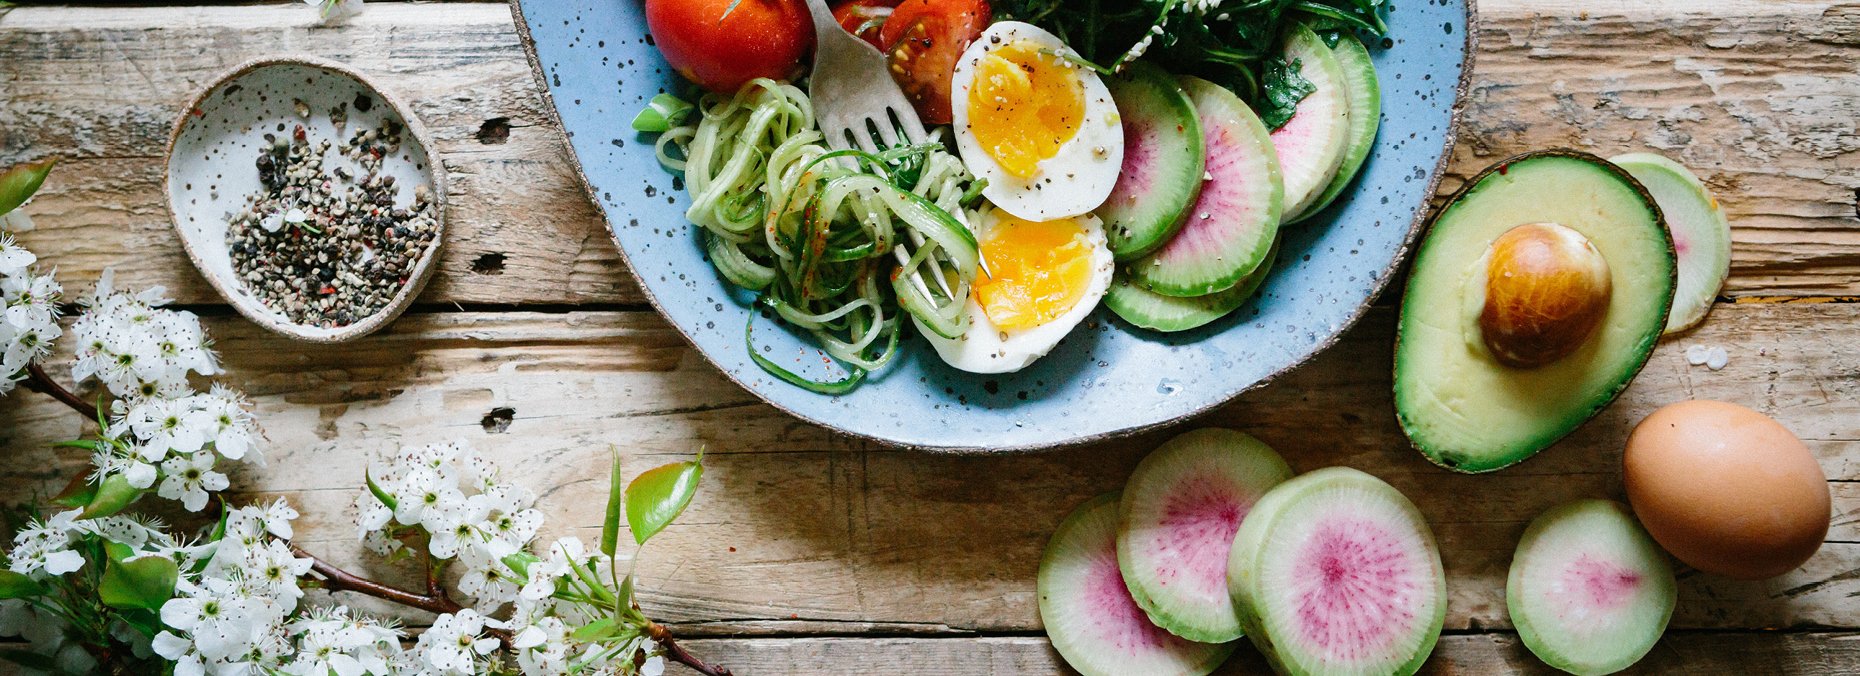 Ketogenic diet options for cardiometabolic health